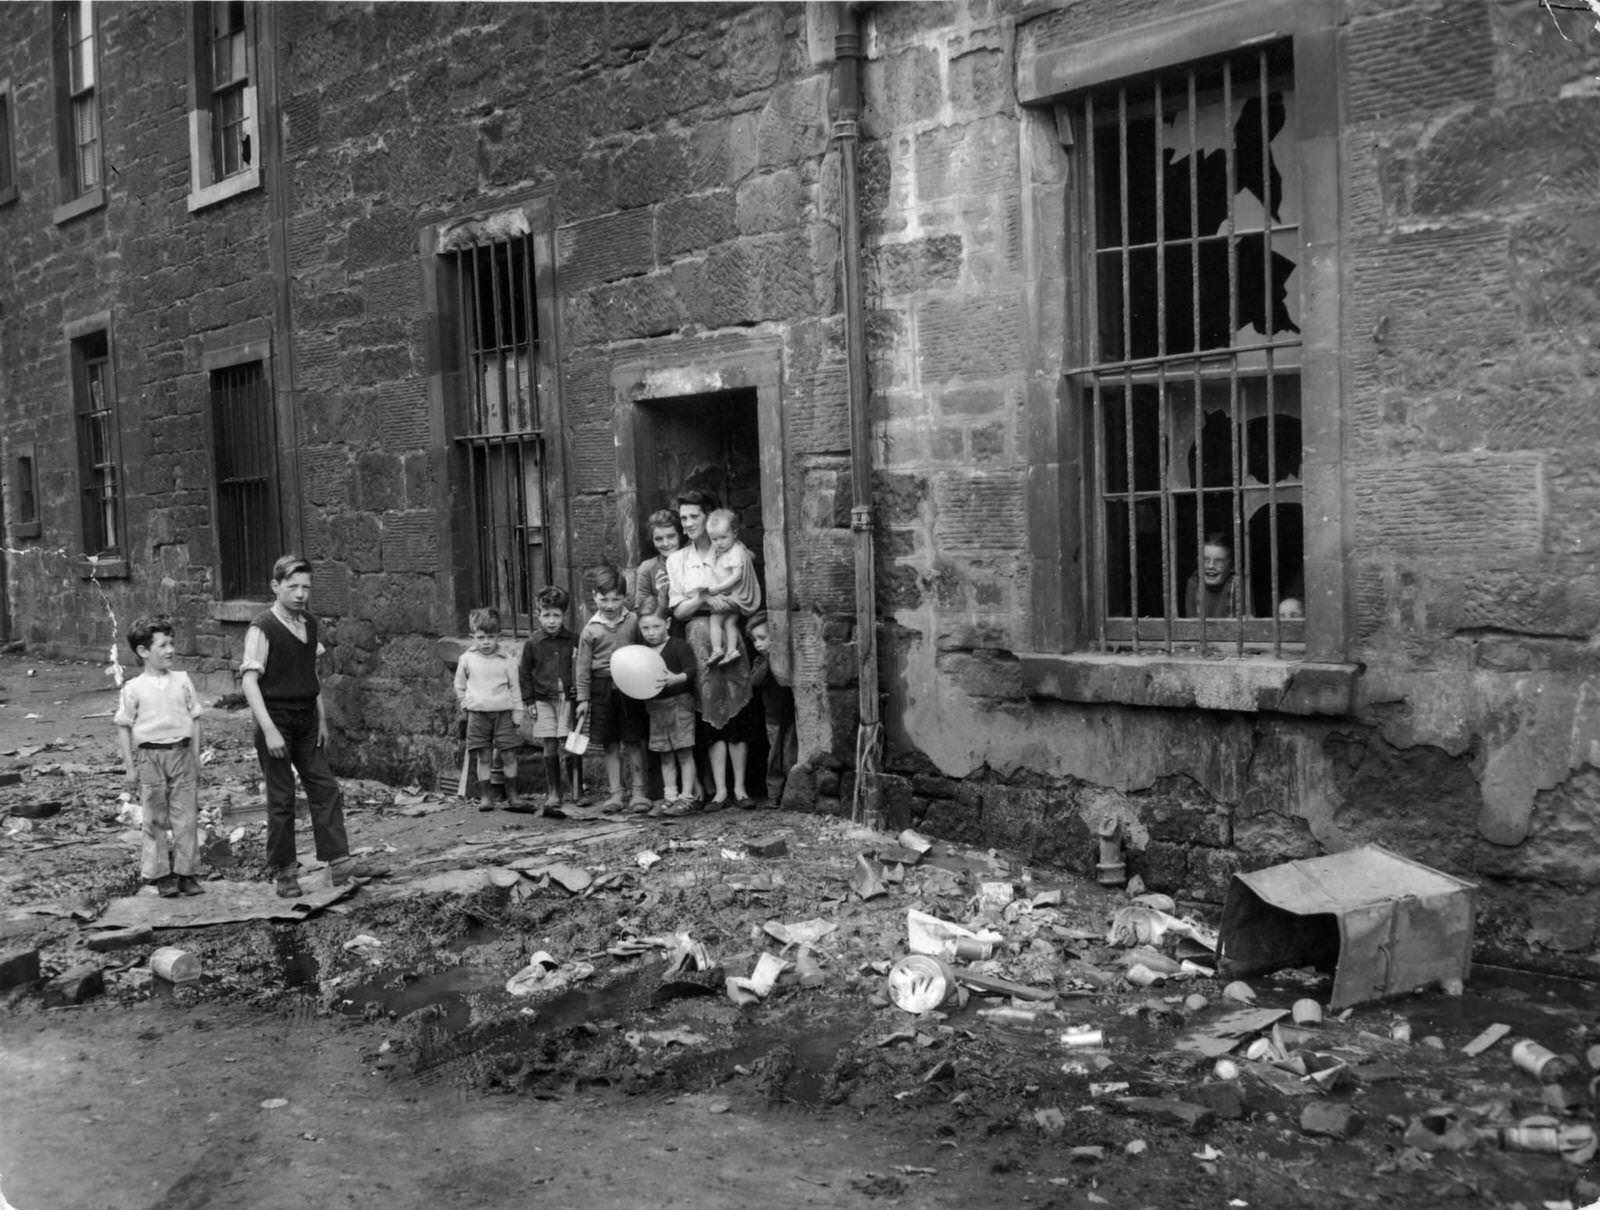 The Surrey Lane entrance to Nicholson Street flats, in the Gorbals, the notorious slum district of Glasgow, 1956